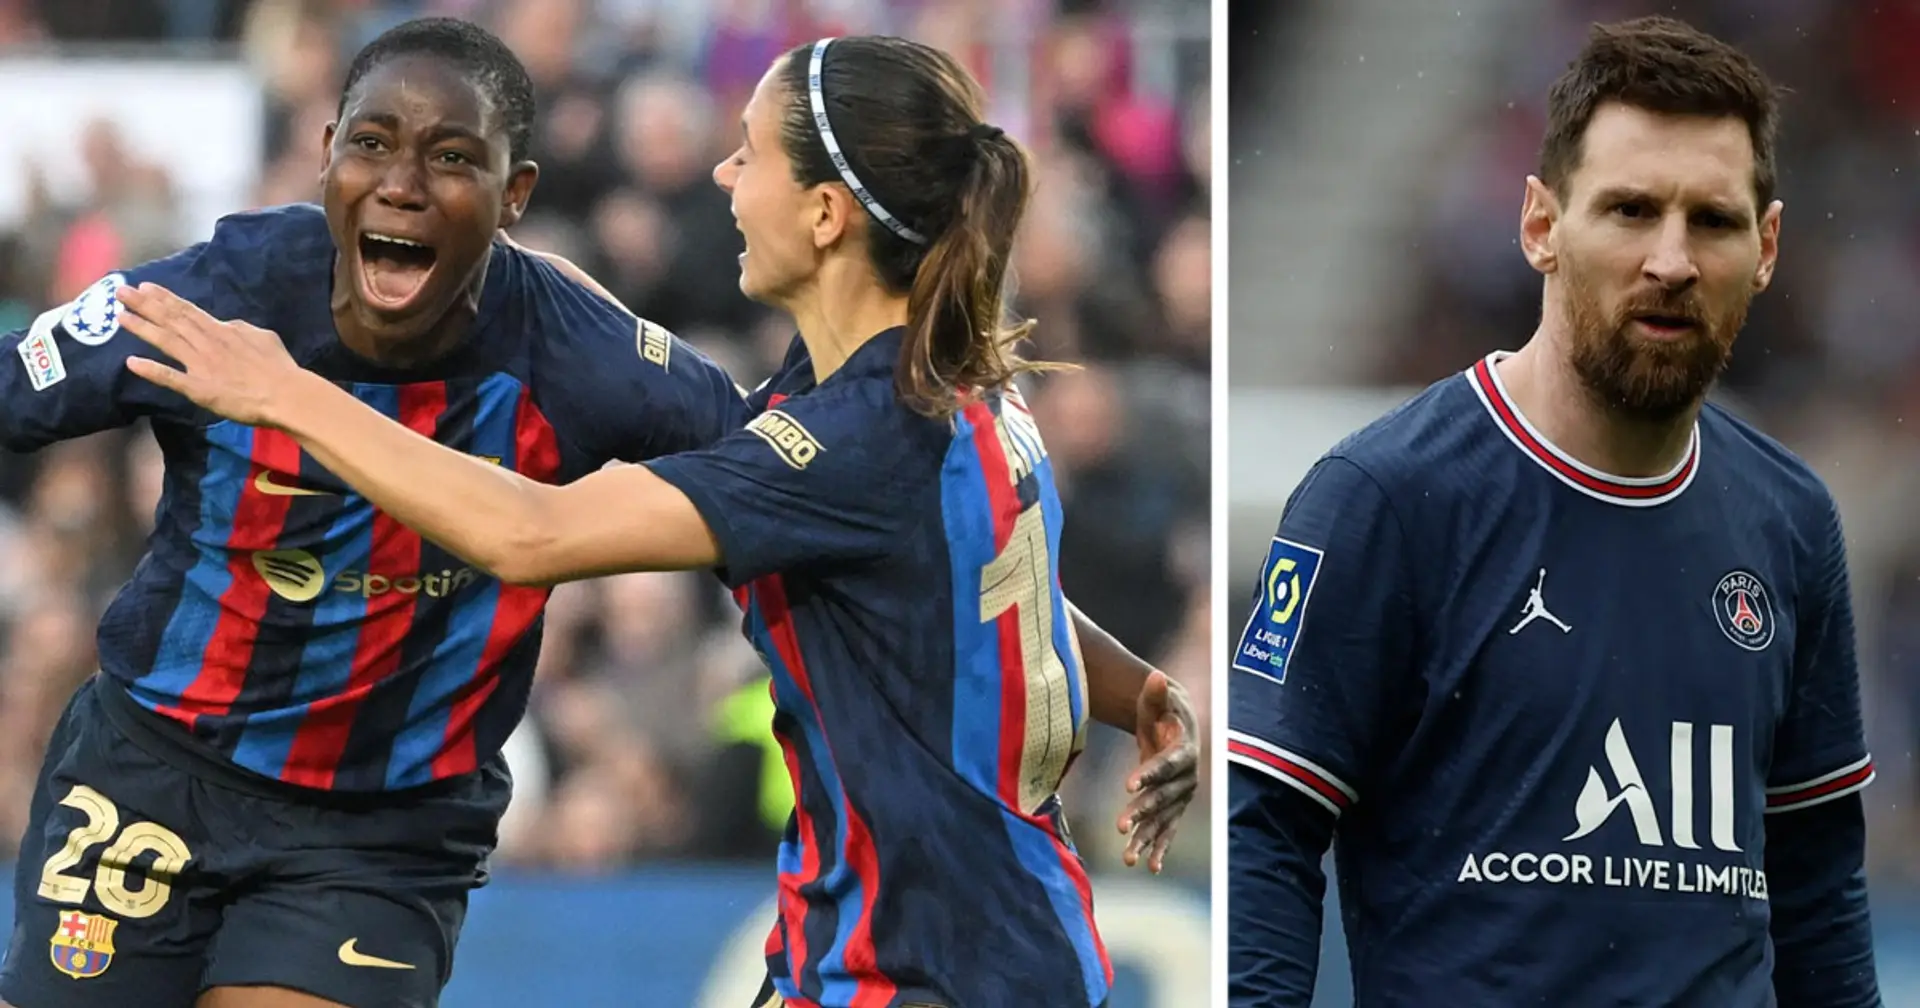 Barca Femeni learn their rival for Women's UCL semi-final and 3 more under-radar stories today